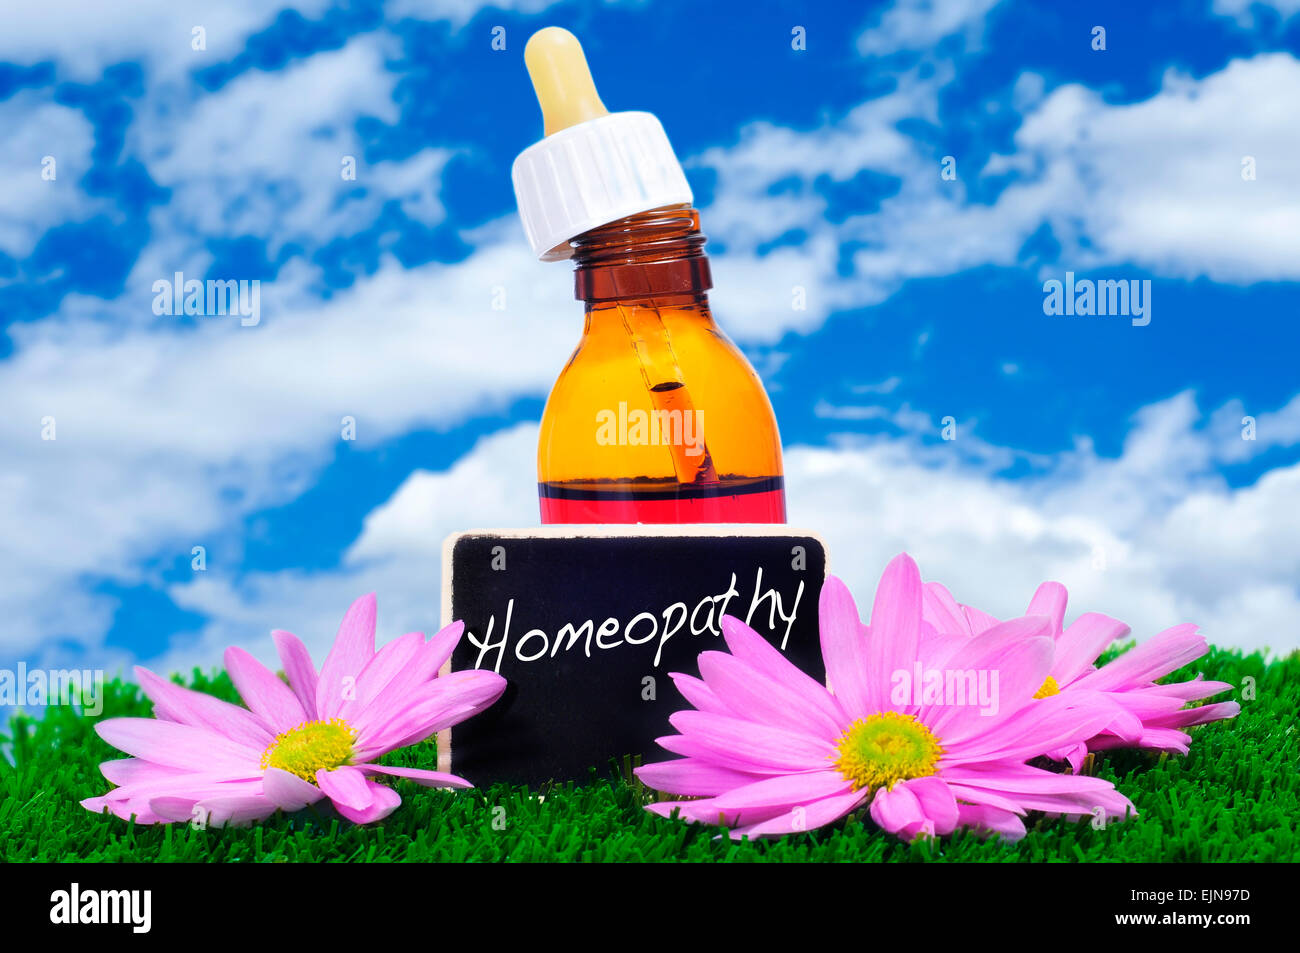 a dropper bottle and some purple flowers on the grass with a blackboard label with the word homeopathy written on it Stock Photo